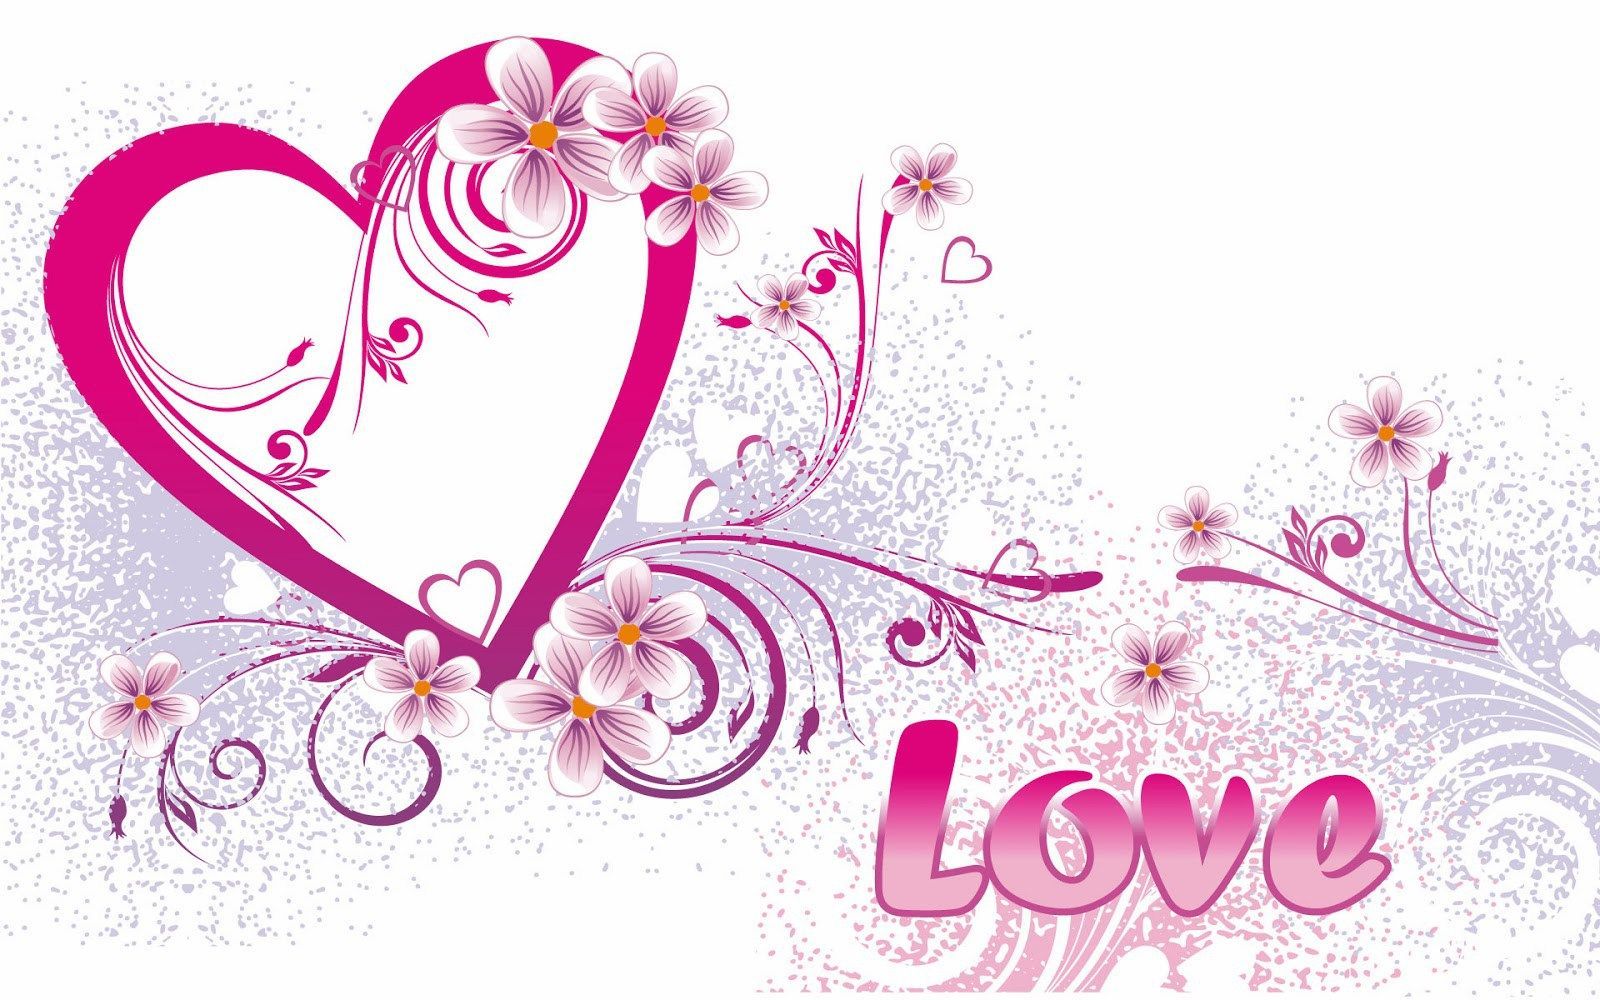 Love sign Wallpaper. Cute love wallpaper, Valentines wallpaper, Valentine's day quotes